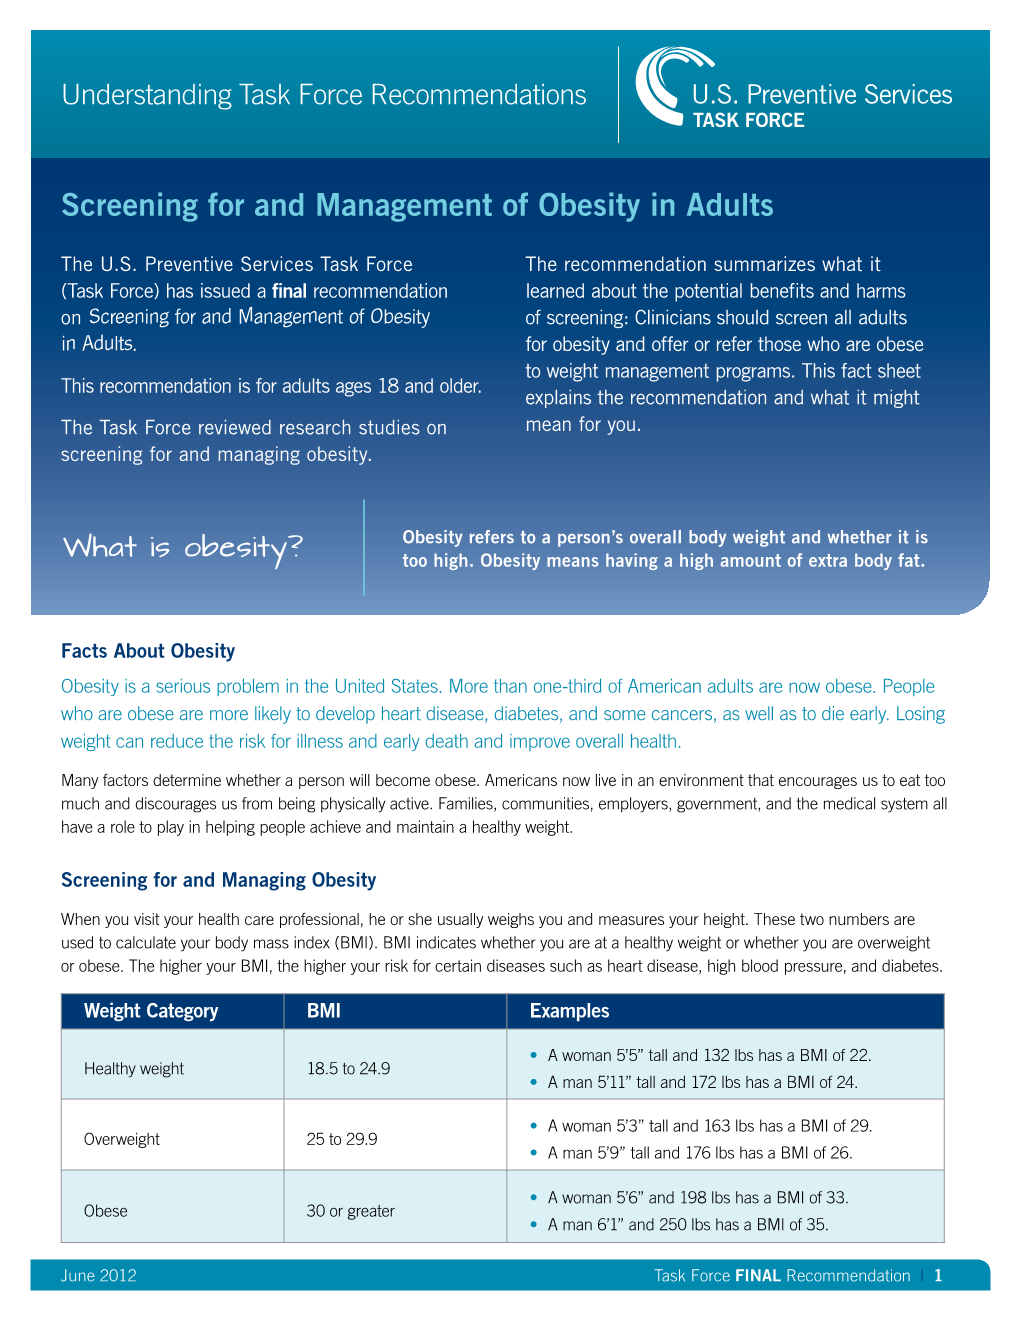 Screening for and Management of Obesity in Adults